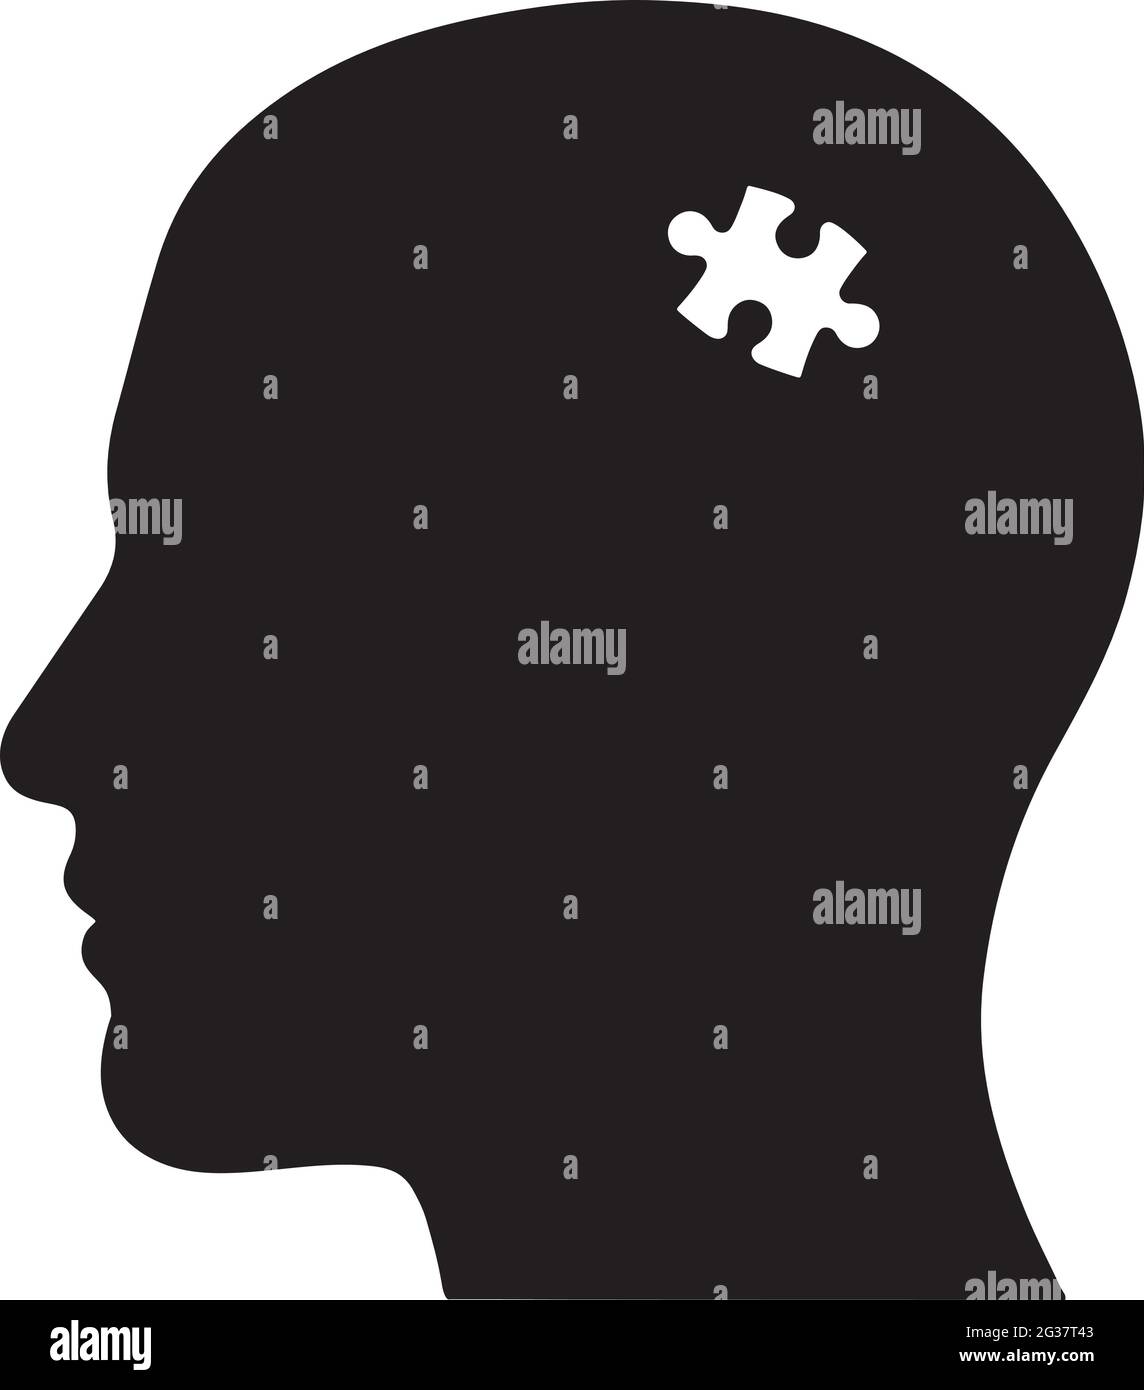 Vector illustration silhouette of Human Head with a puzzle piece missing indicating Alzheimers disease Stock Vector